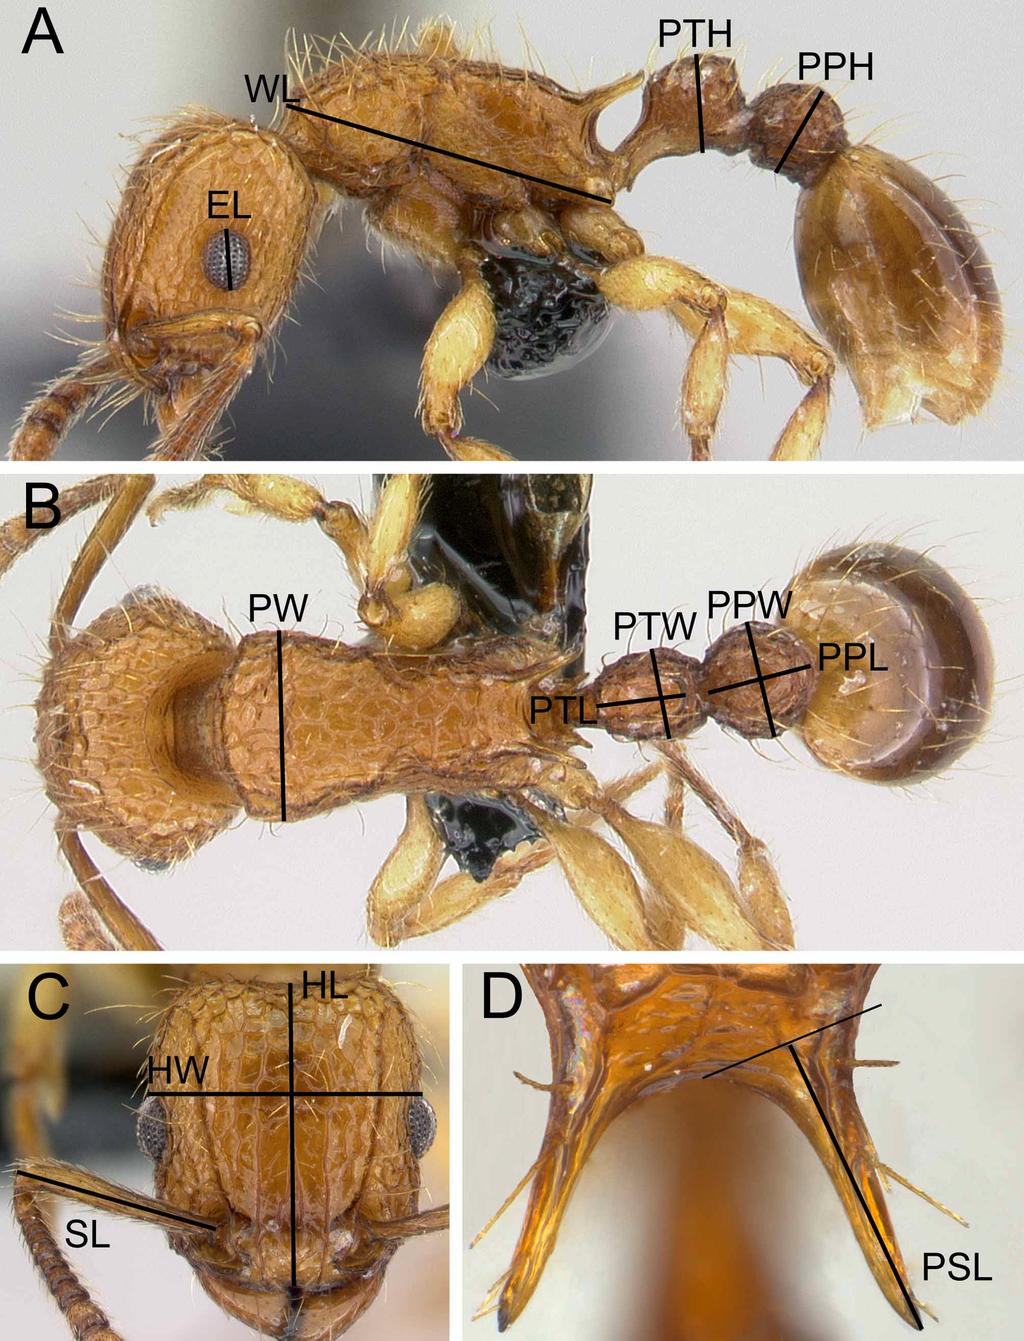 FIGURE 1. Images of Tetramorium insolens (Smith, F., 1861) illustrating the used measurements. A. body in lateral view with measuring lines for EL, PPH, PTH, and WL. B.